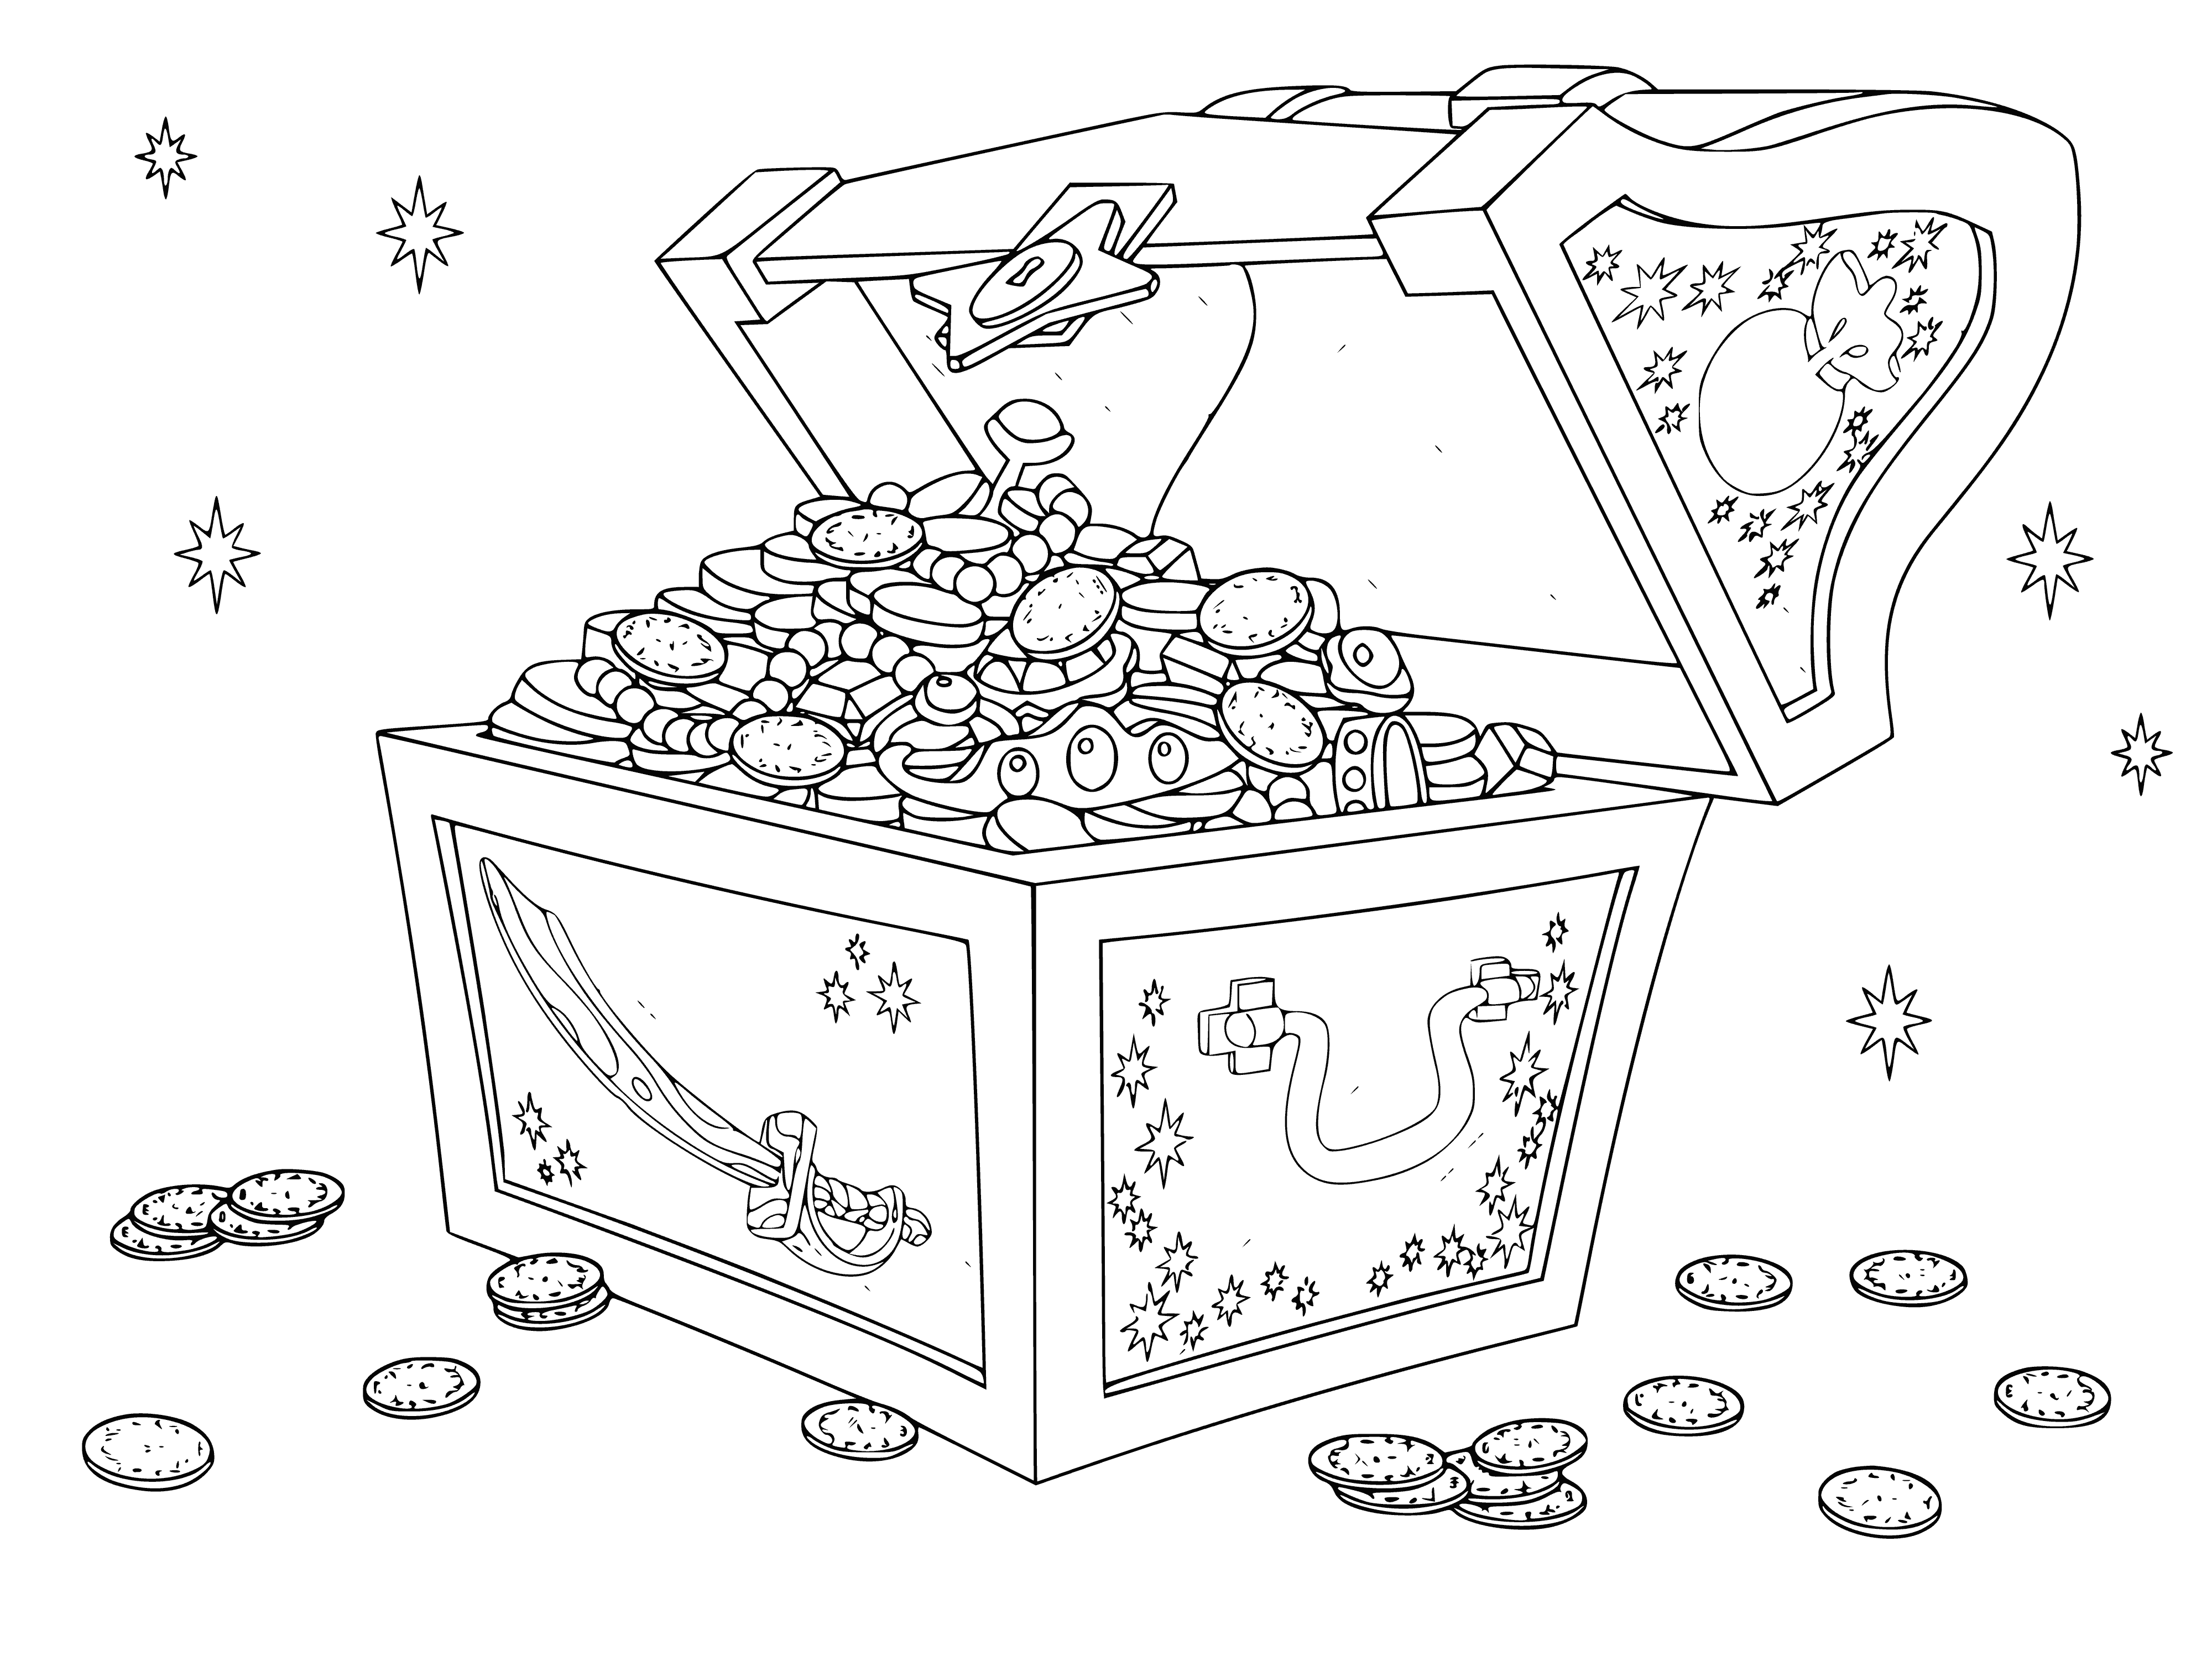 coloring page: Treasure chest with skull design and keyhole, brown color with golden details - looks great!